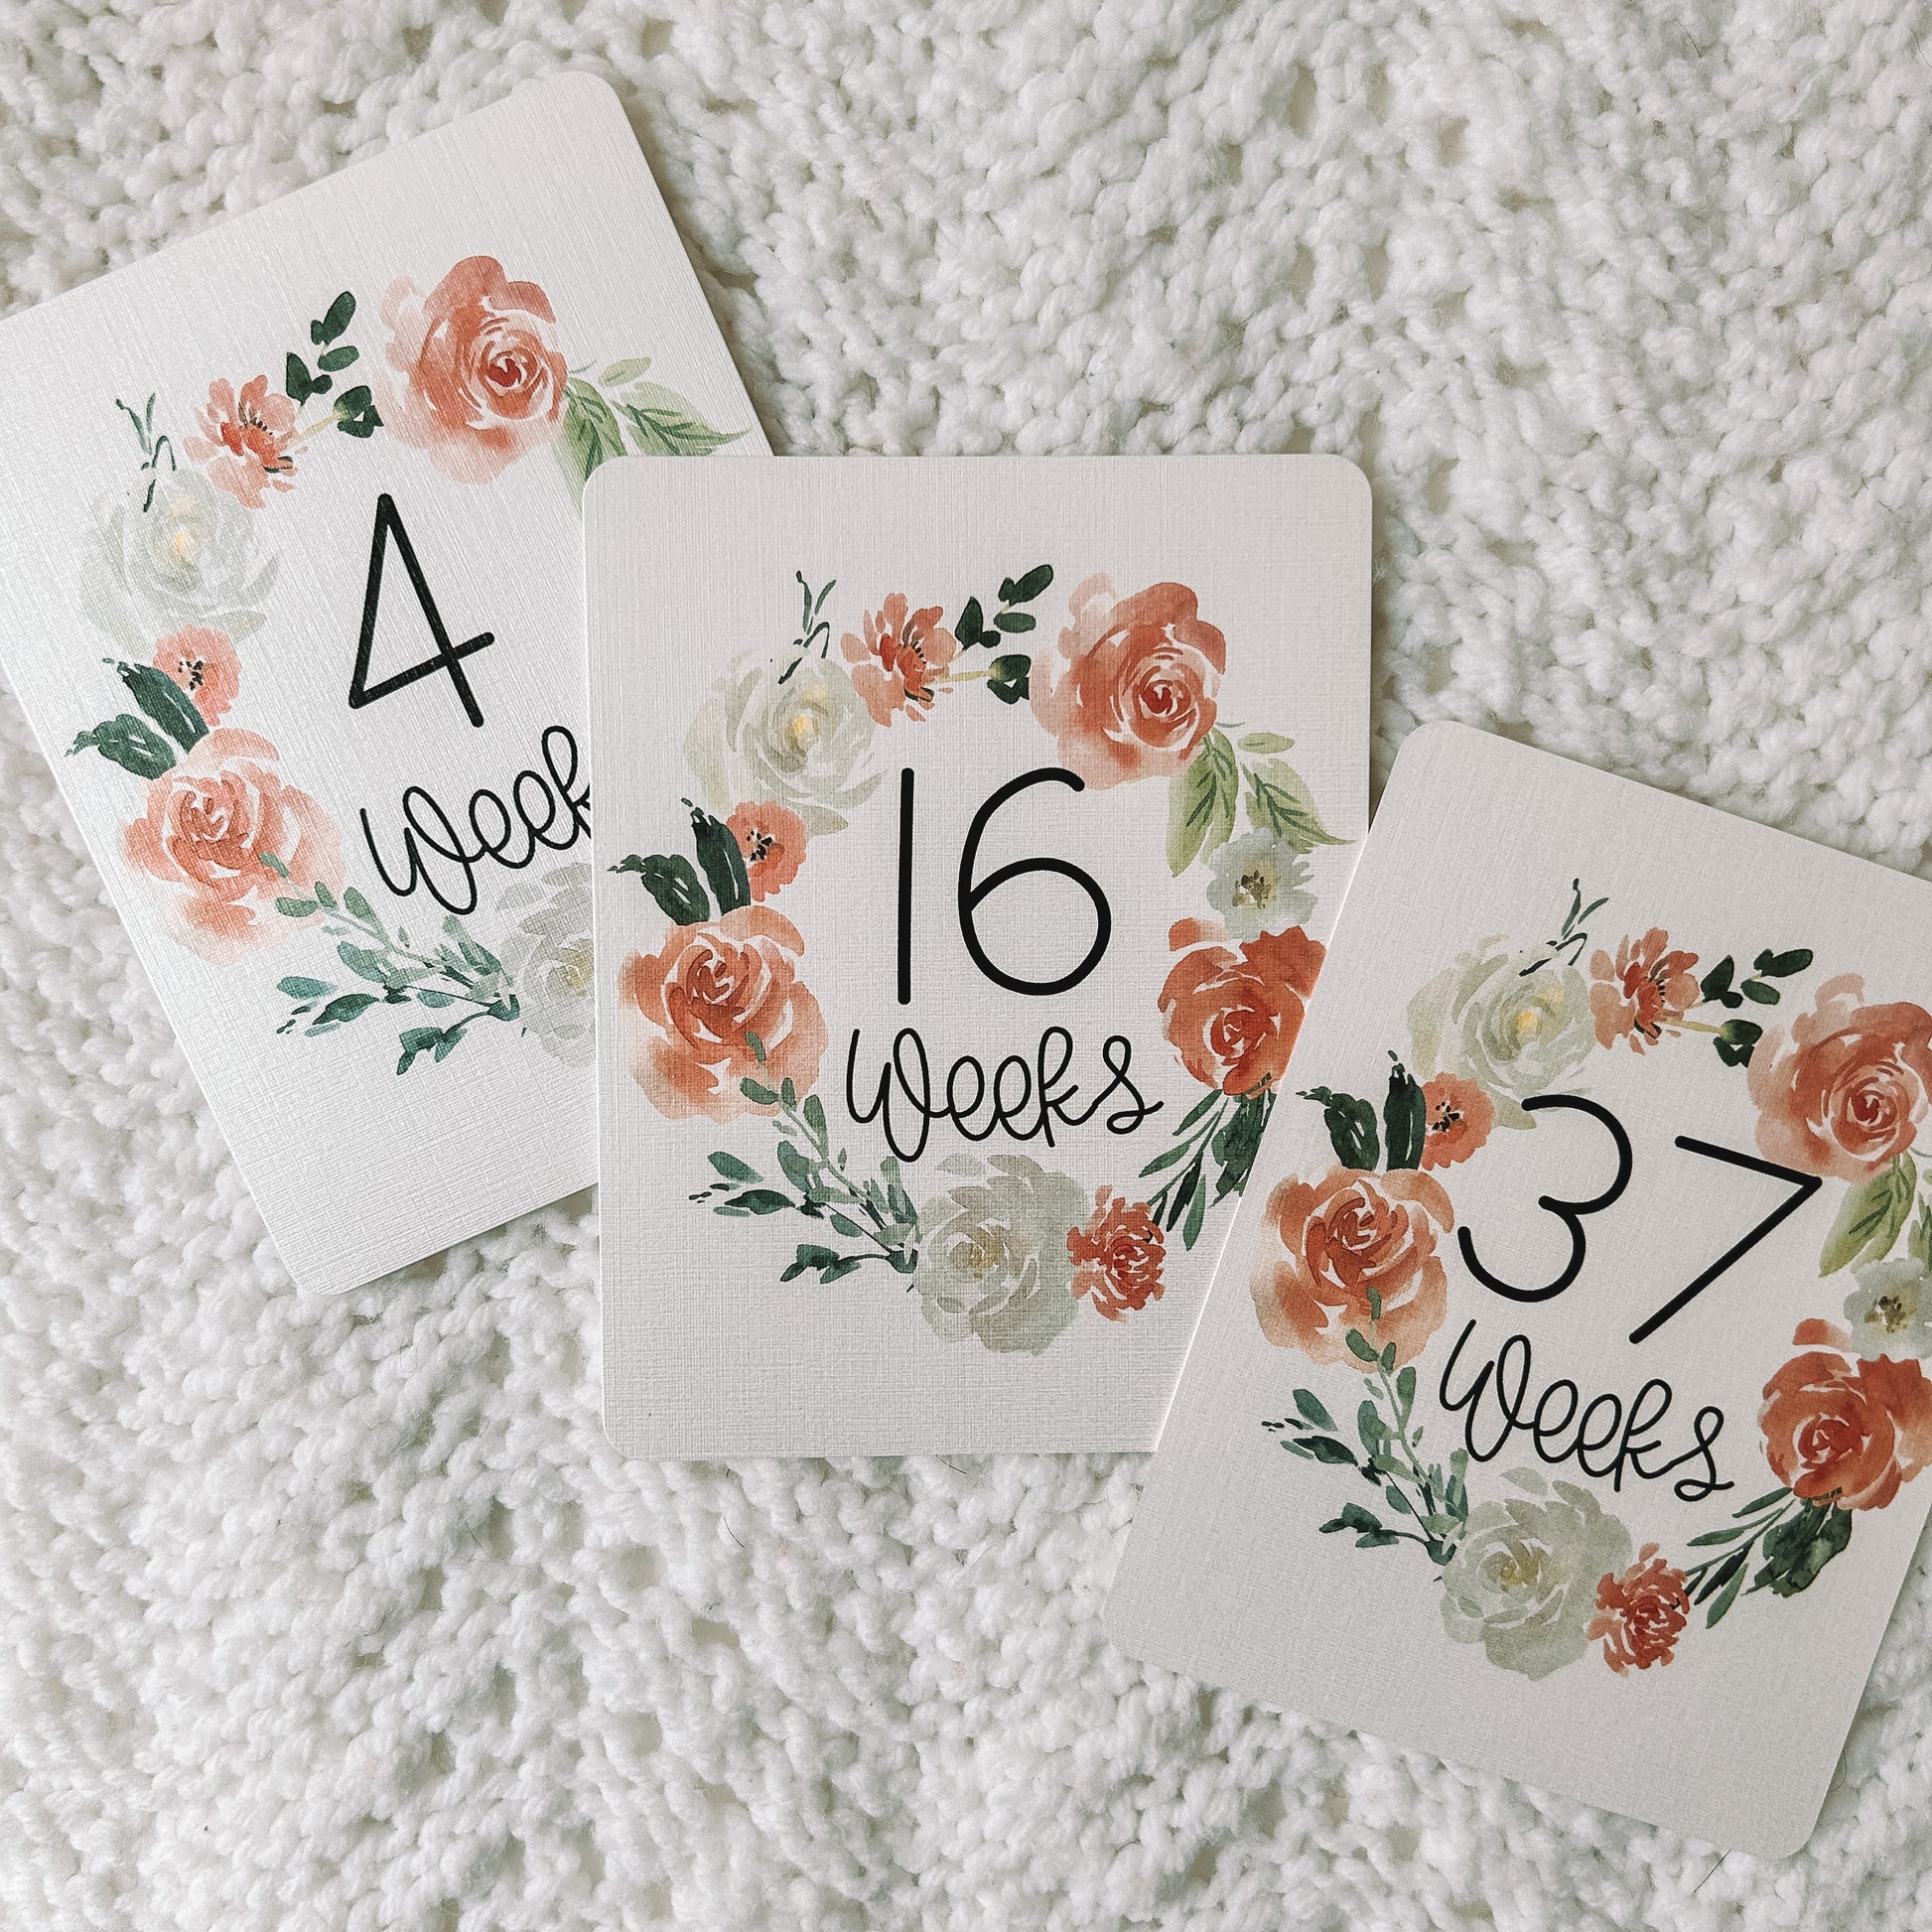 Three cards that read 4 weeks, 16 weeks, and 37 weeks with a floral wreath around the black text.